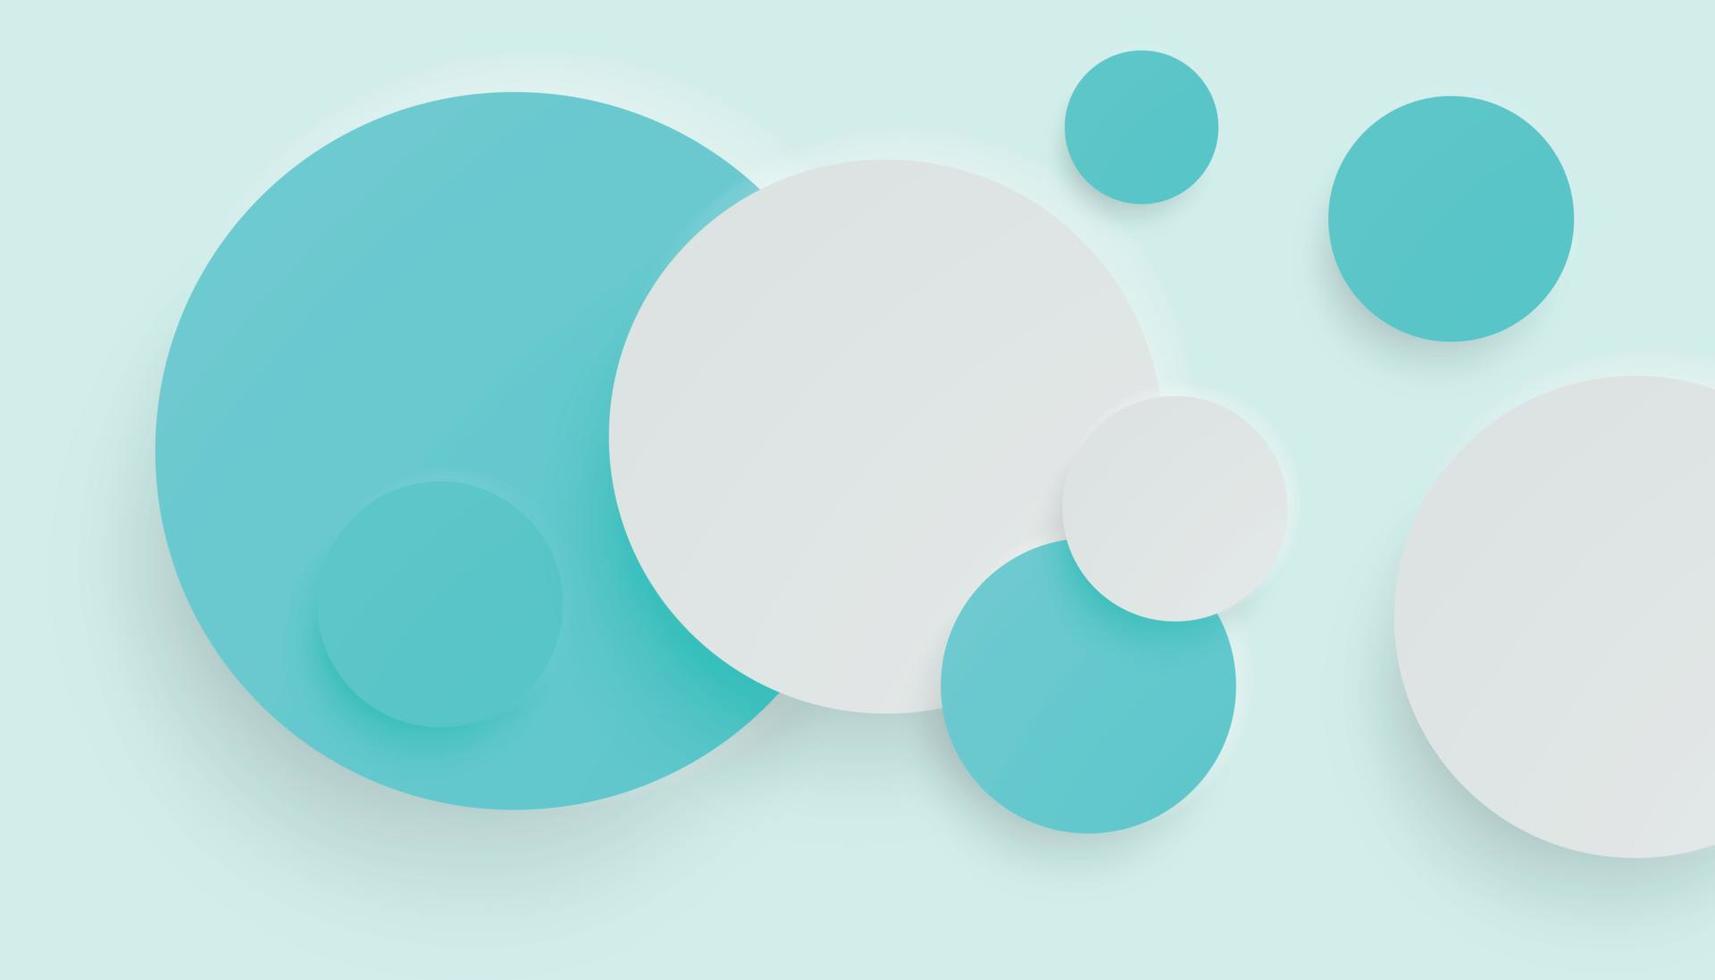 Abstract White and Blue Overlapping Circles. 3D Paper Cut Background. Vector Illustration